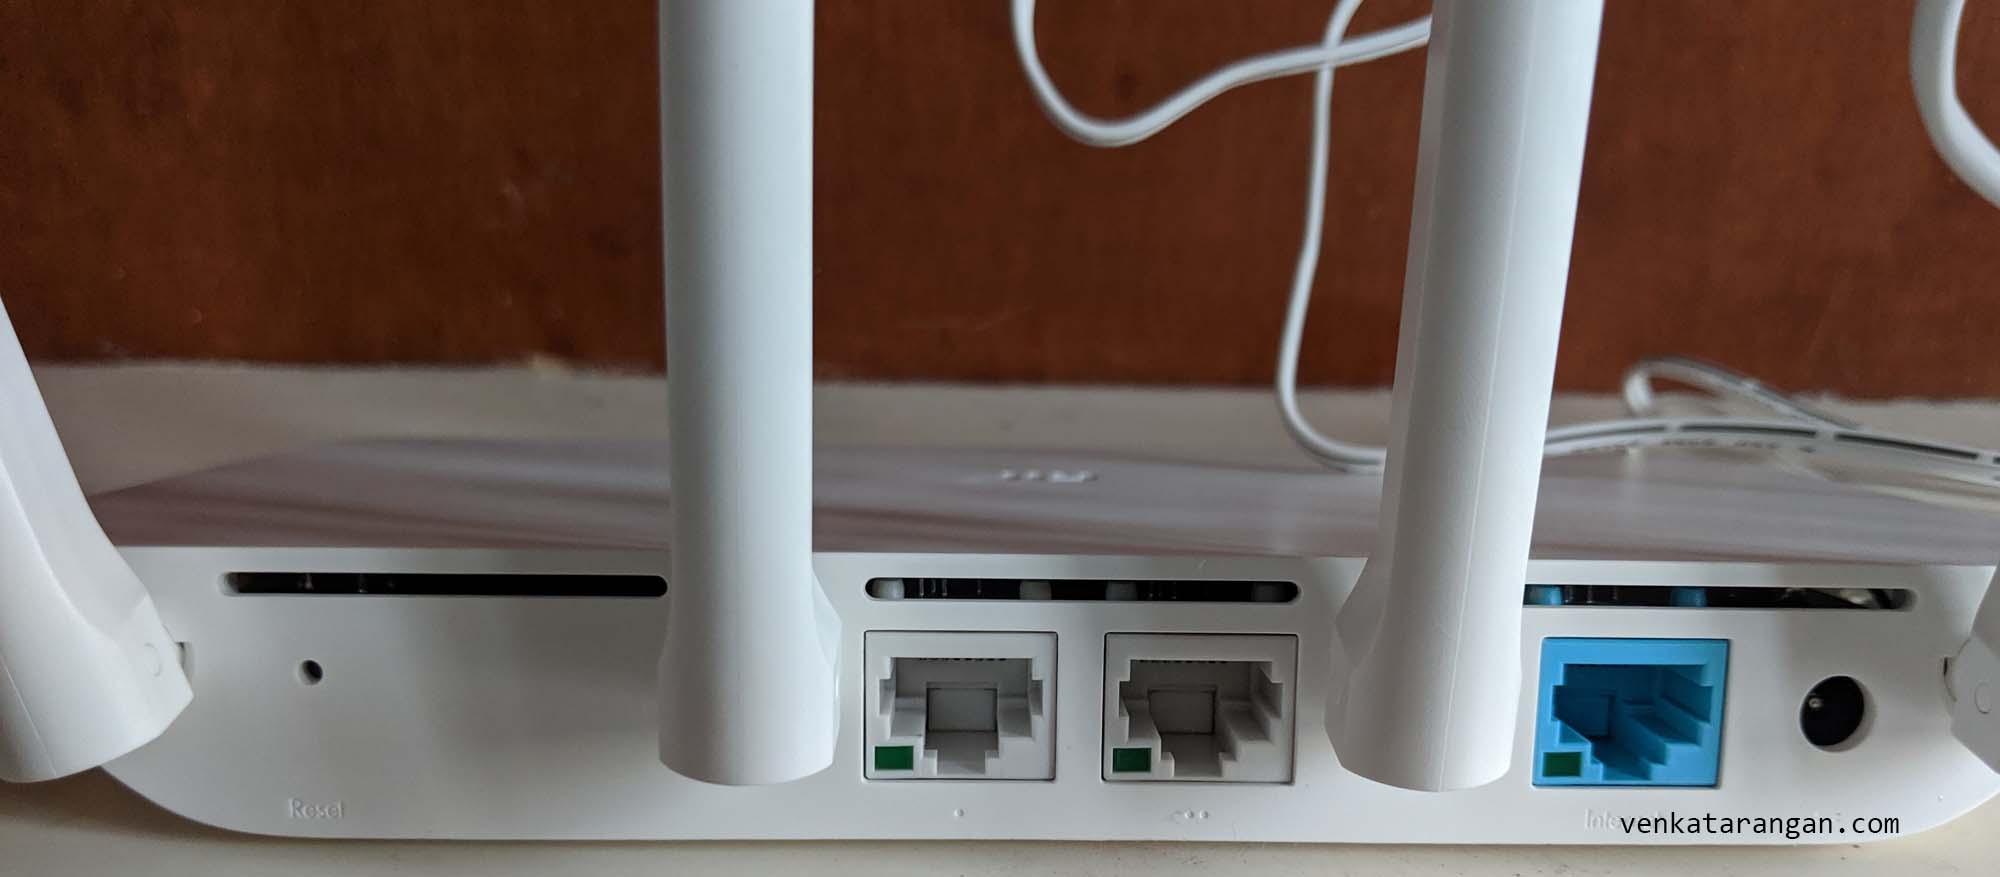 (view from behind) Xiaomi Router 3C has two Ethernet LAN ports (White) and one Internet WAN port (Blue)